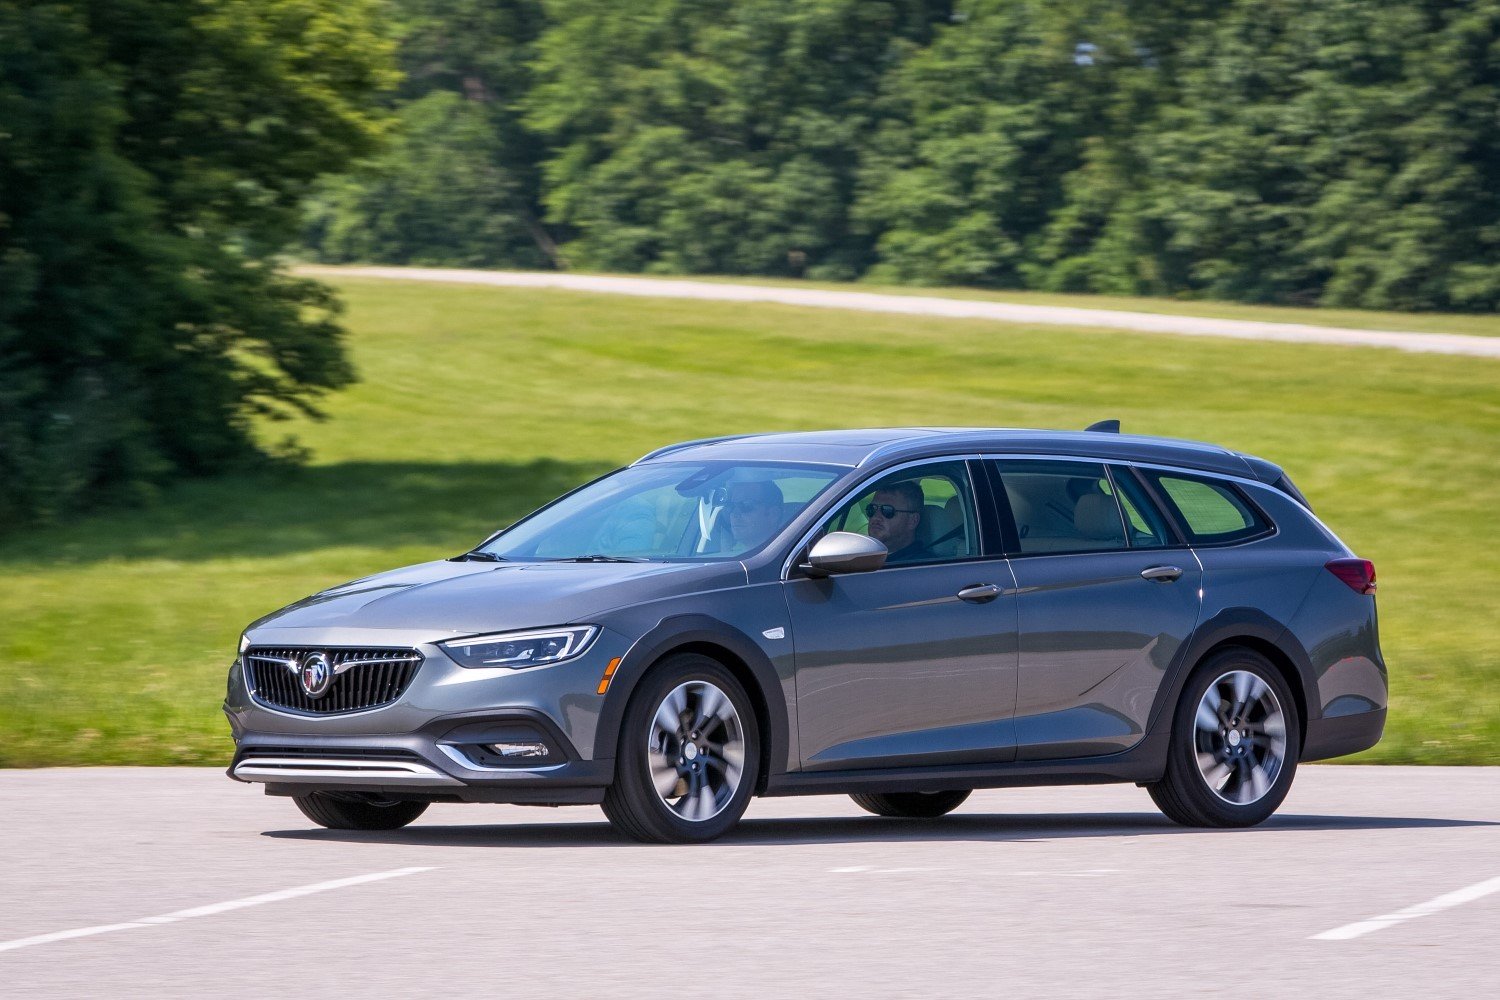 2018 Buick Regal TourX Wagon Specs, Review, and Pricing | CarSession